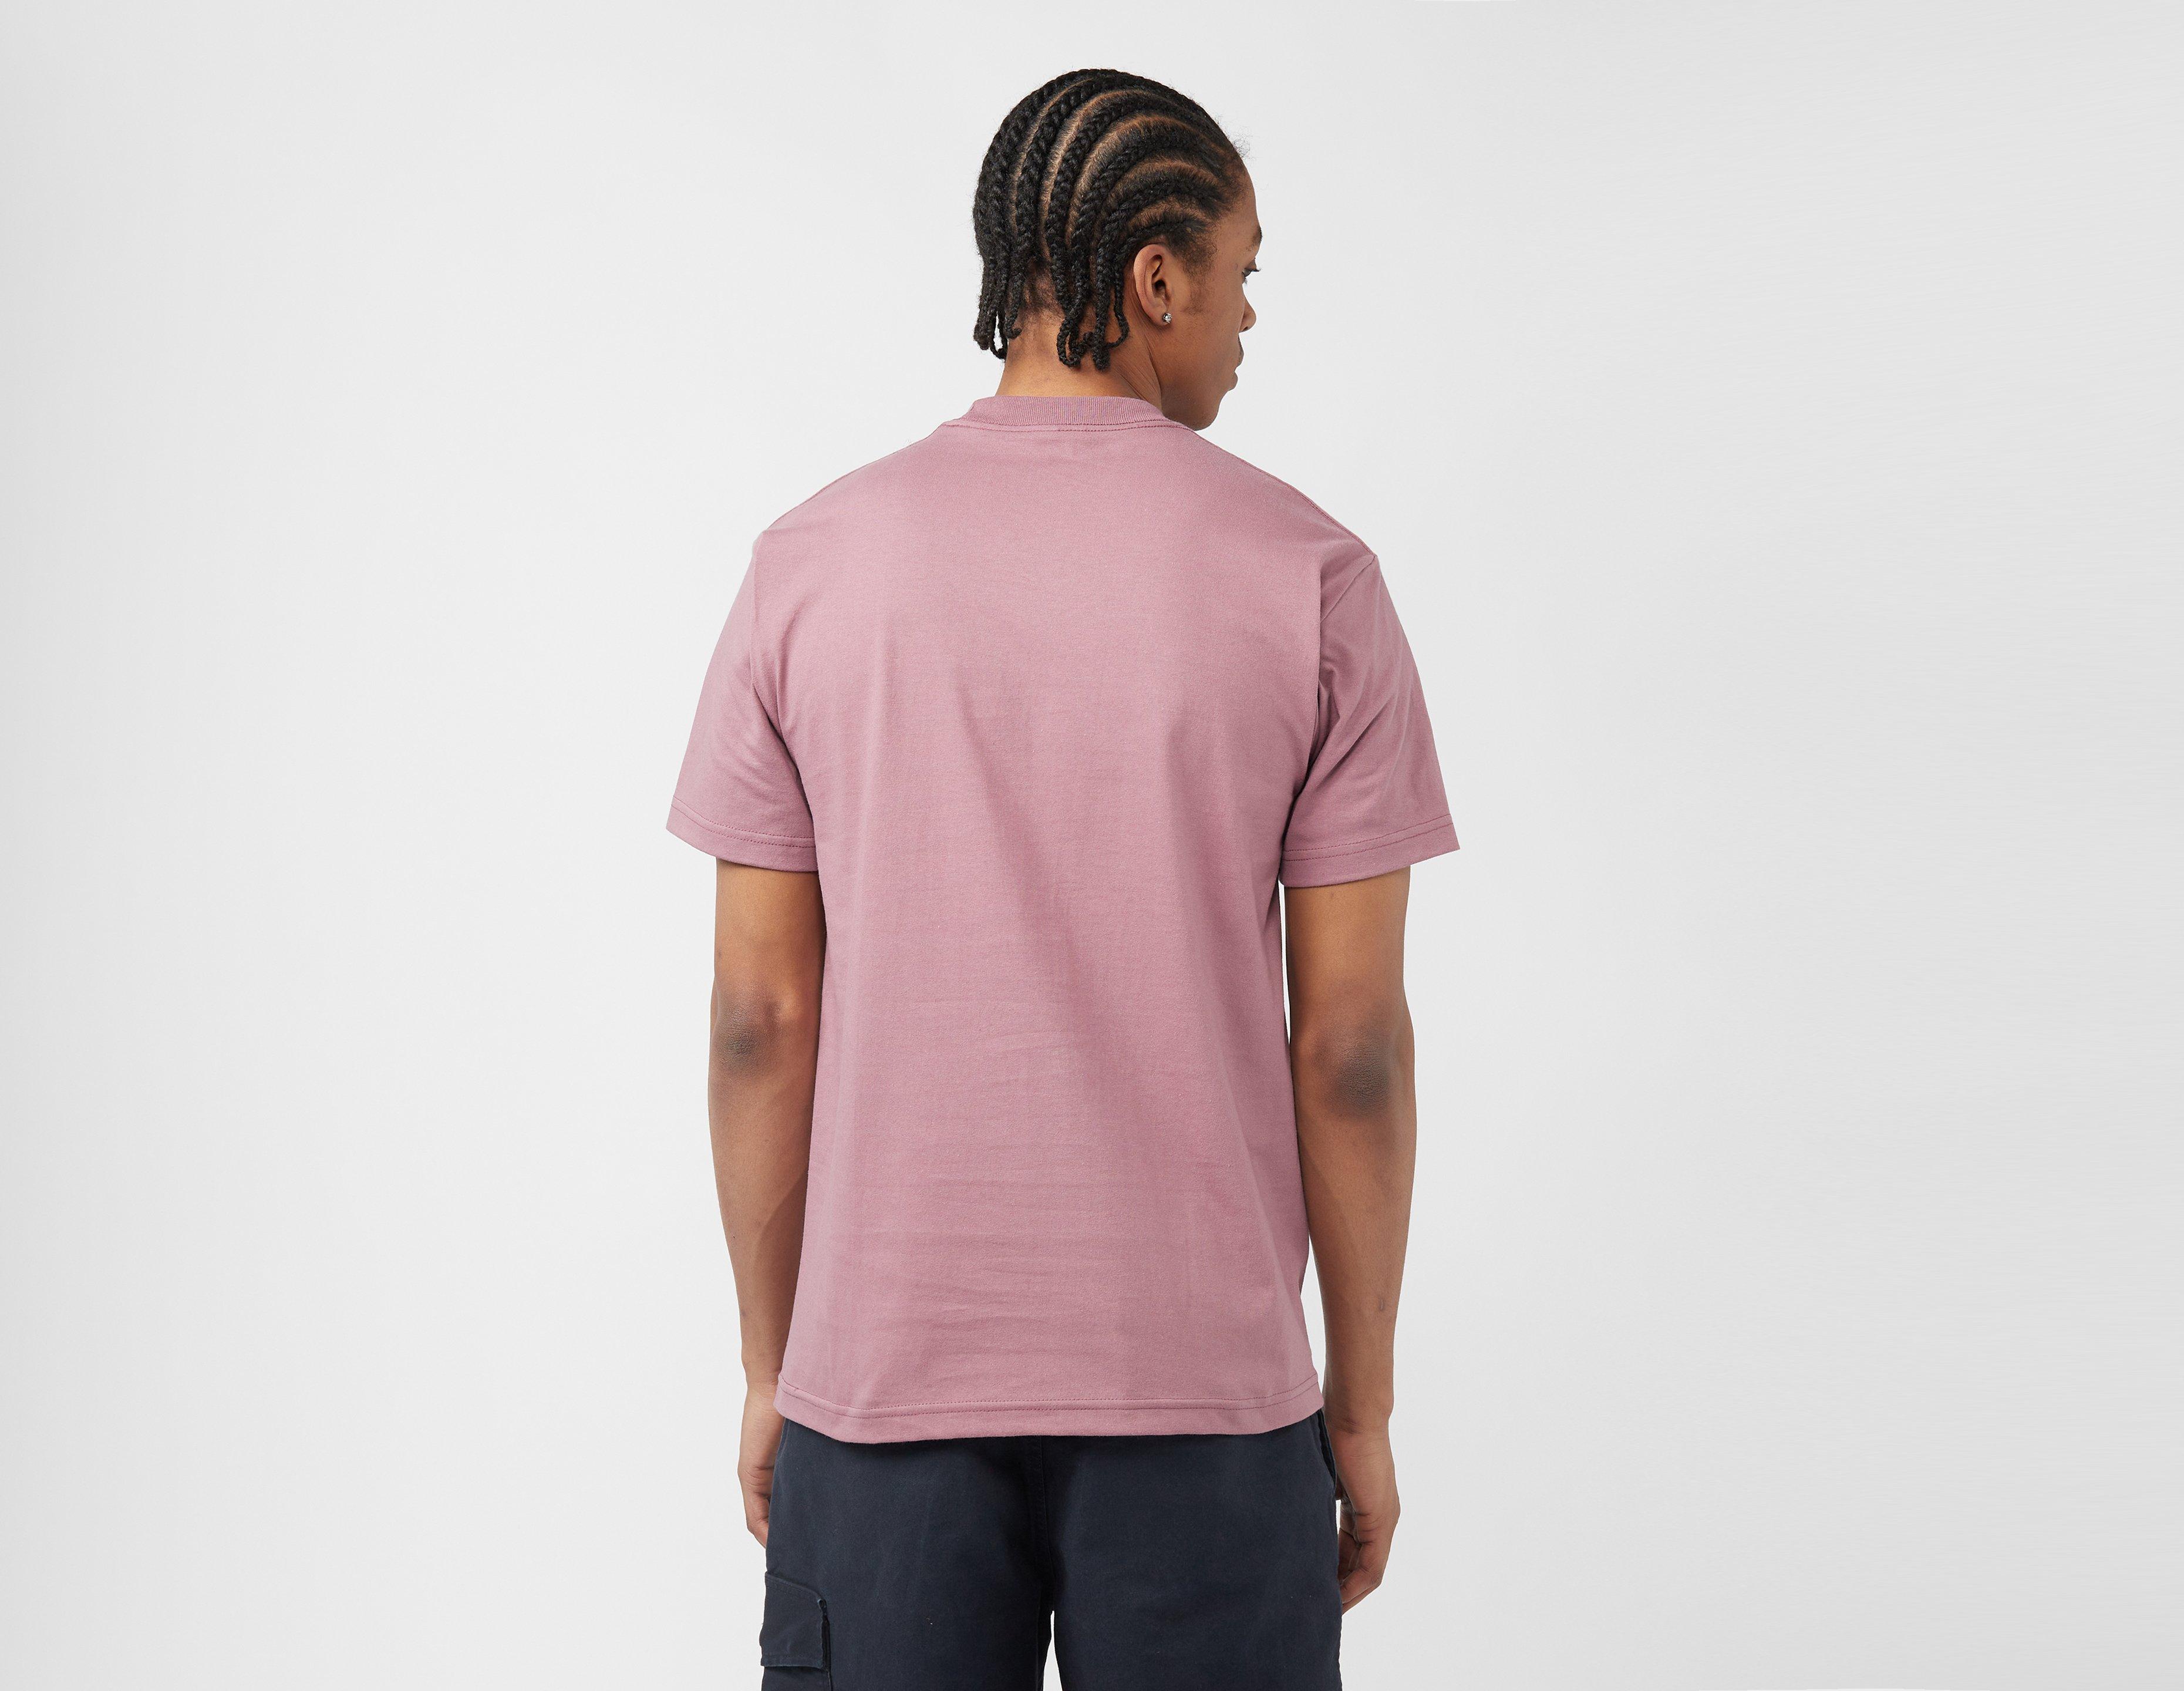 Healthdesign? | Shirt - Pink Huf Best In Show T - unchained back print t- shirt in black acid wash